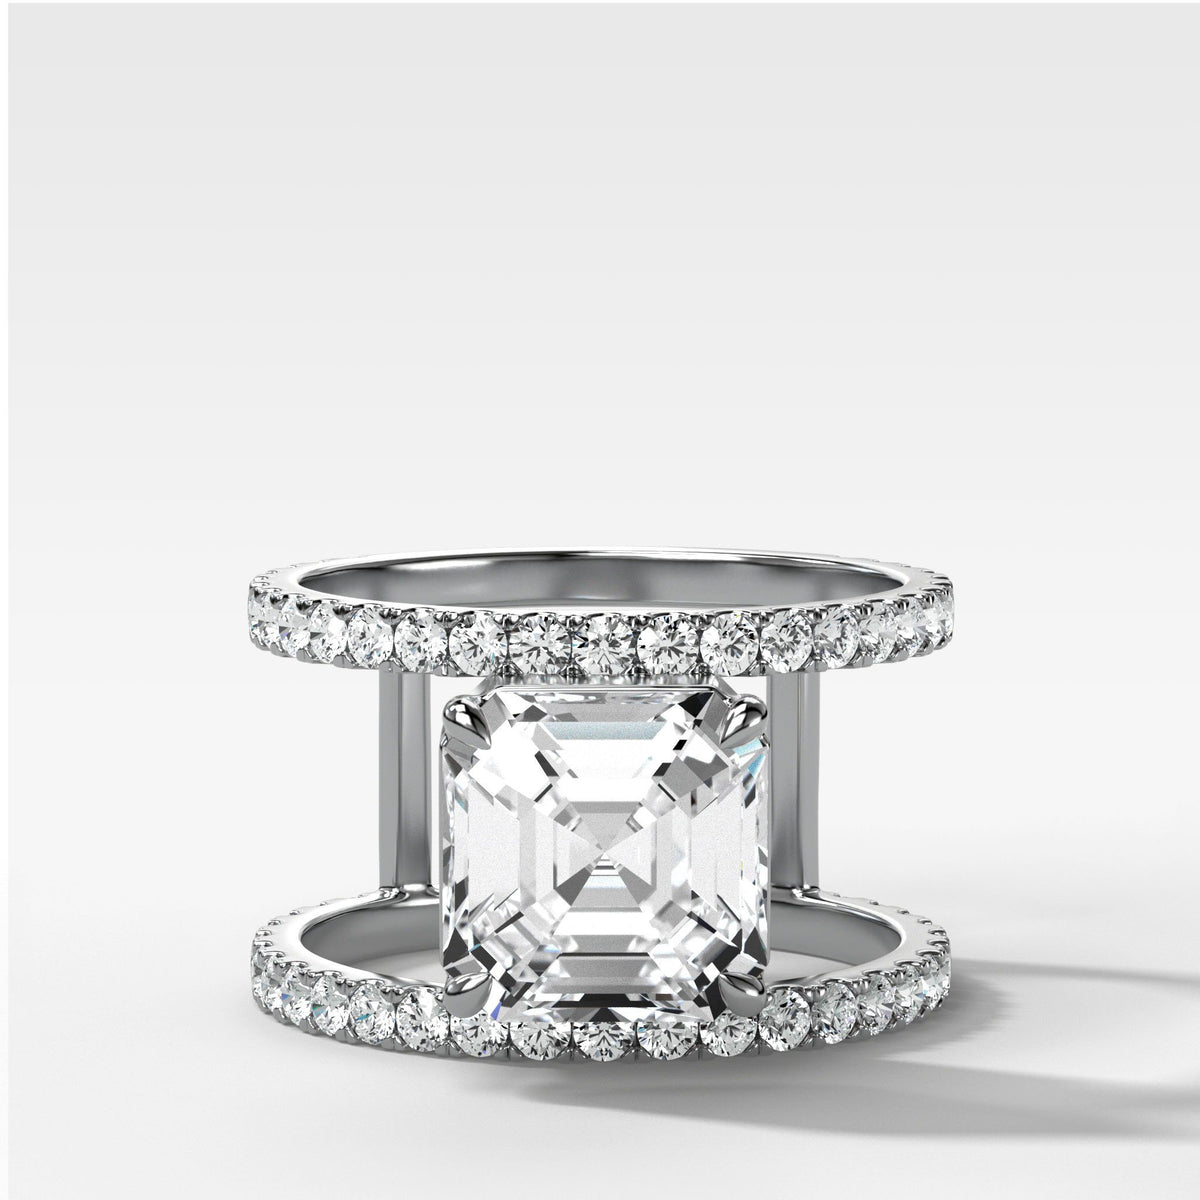 Double Row Gap Engagement Ring With Asscher Cut by Good Stone in White Gold